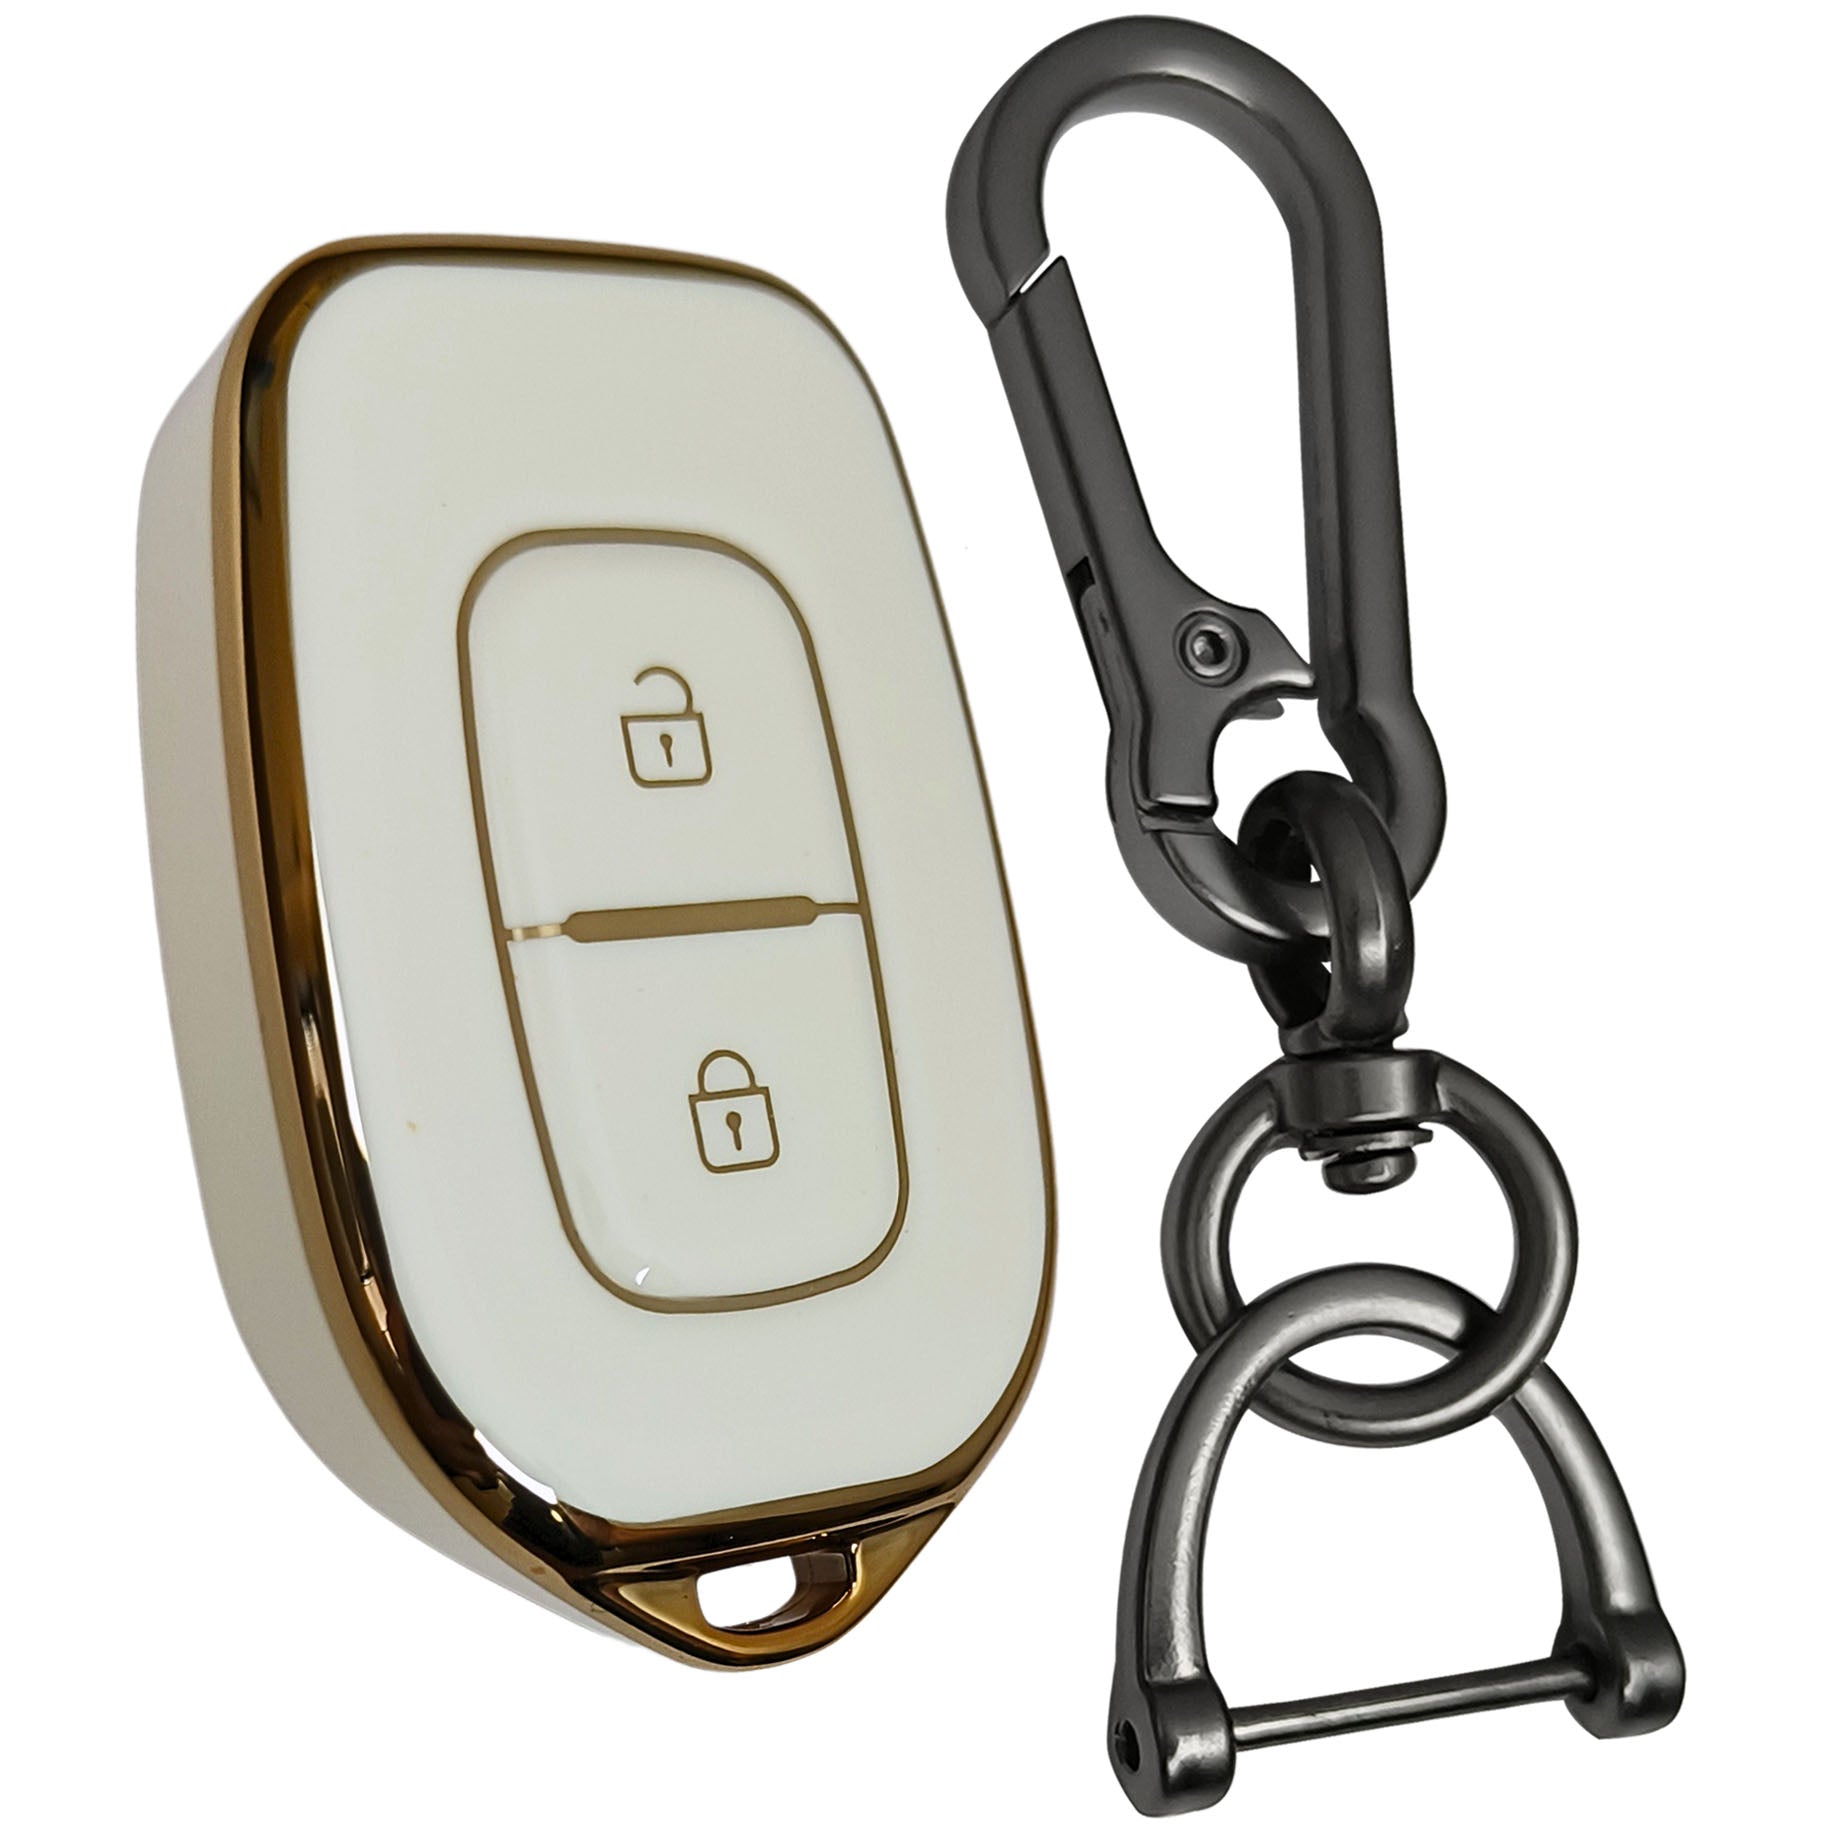 renault kwid kiger duster 2 button remote tpu white gold key cover keychain